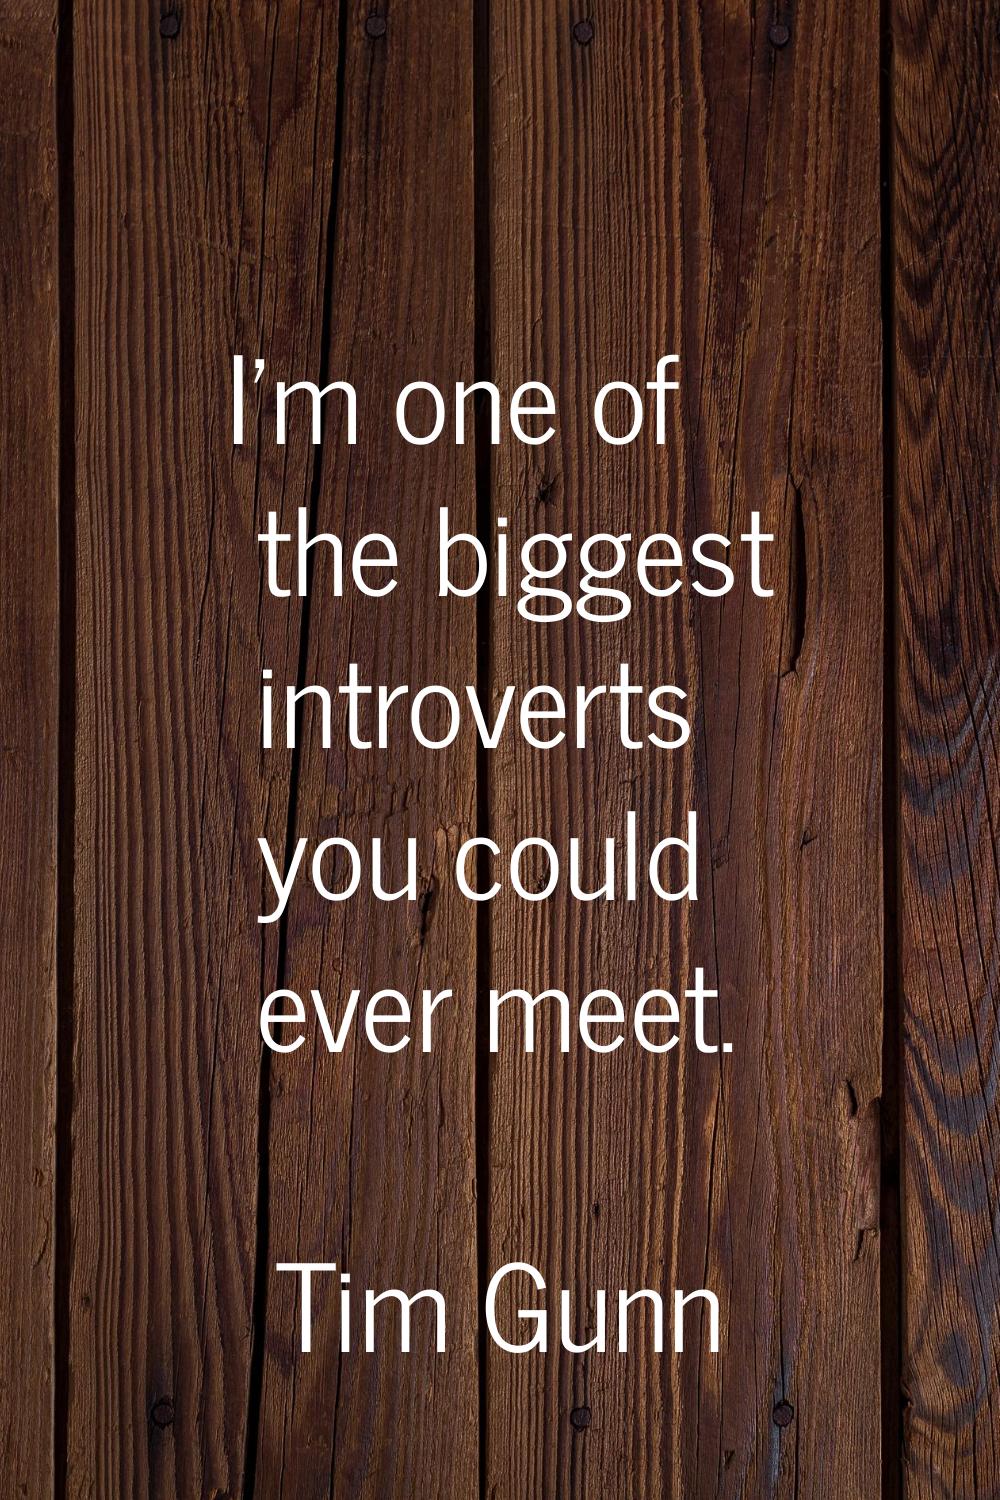 I'm one of the biggest introverts you could ever meet.